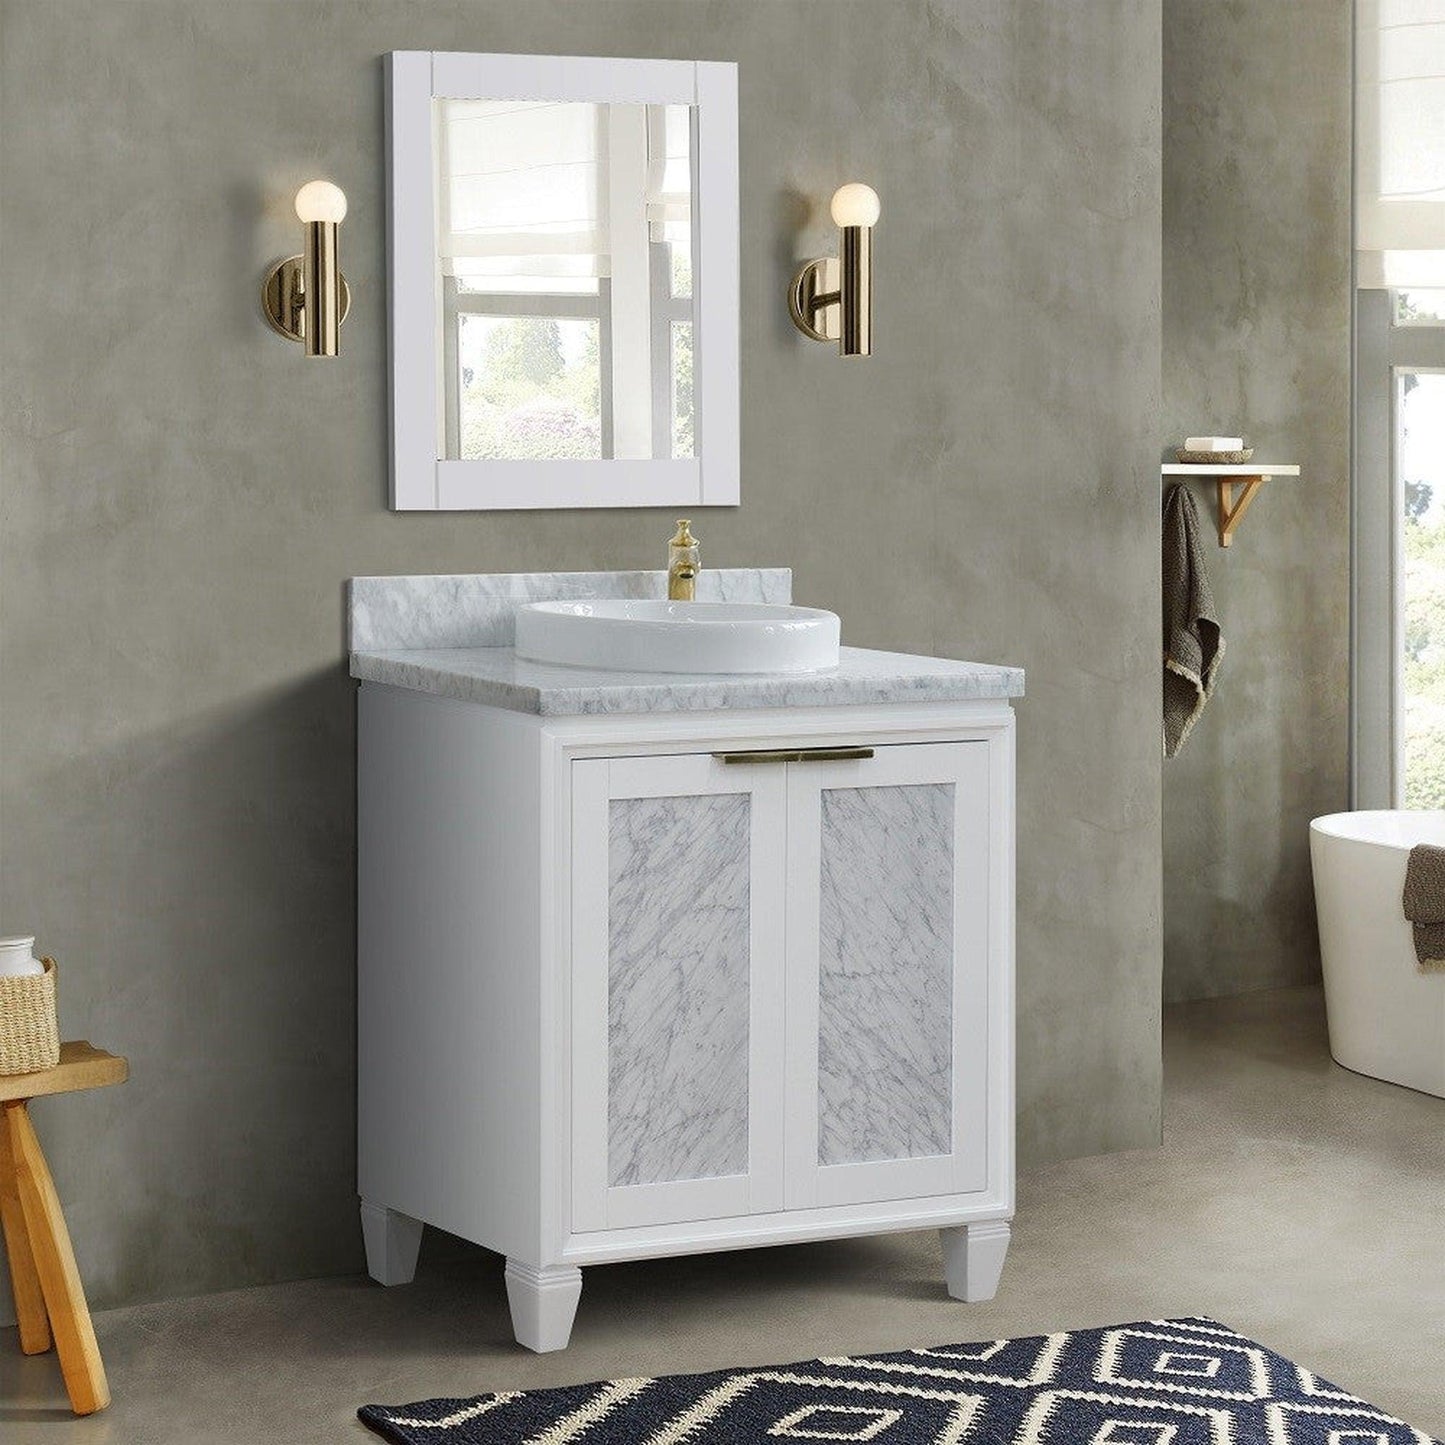 Bellaterra Home Trento 31" 2-Door 1-Drawer White Freestanding Vanity Set With Ceramic Vessel Sink and White Carrara Marble Top